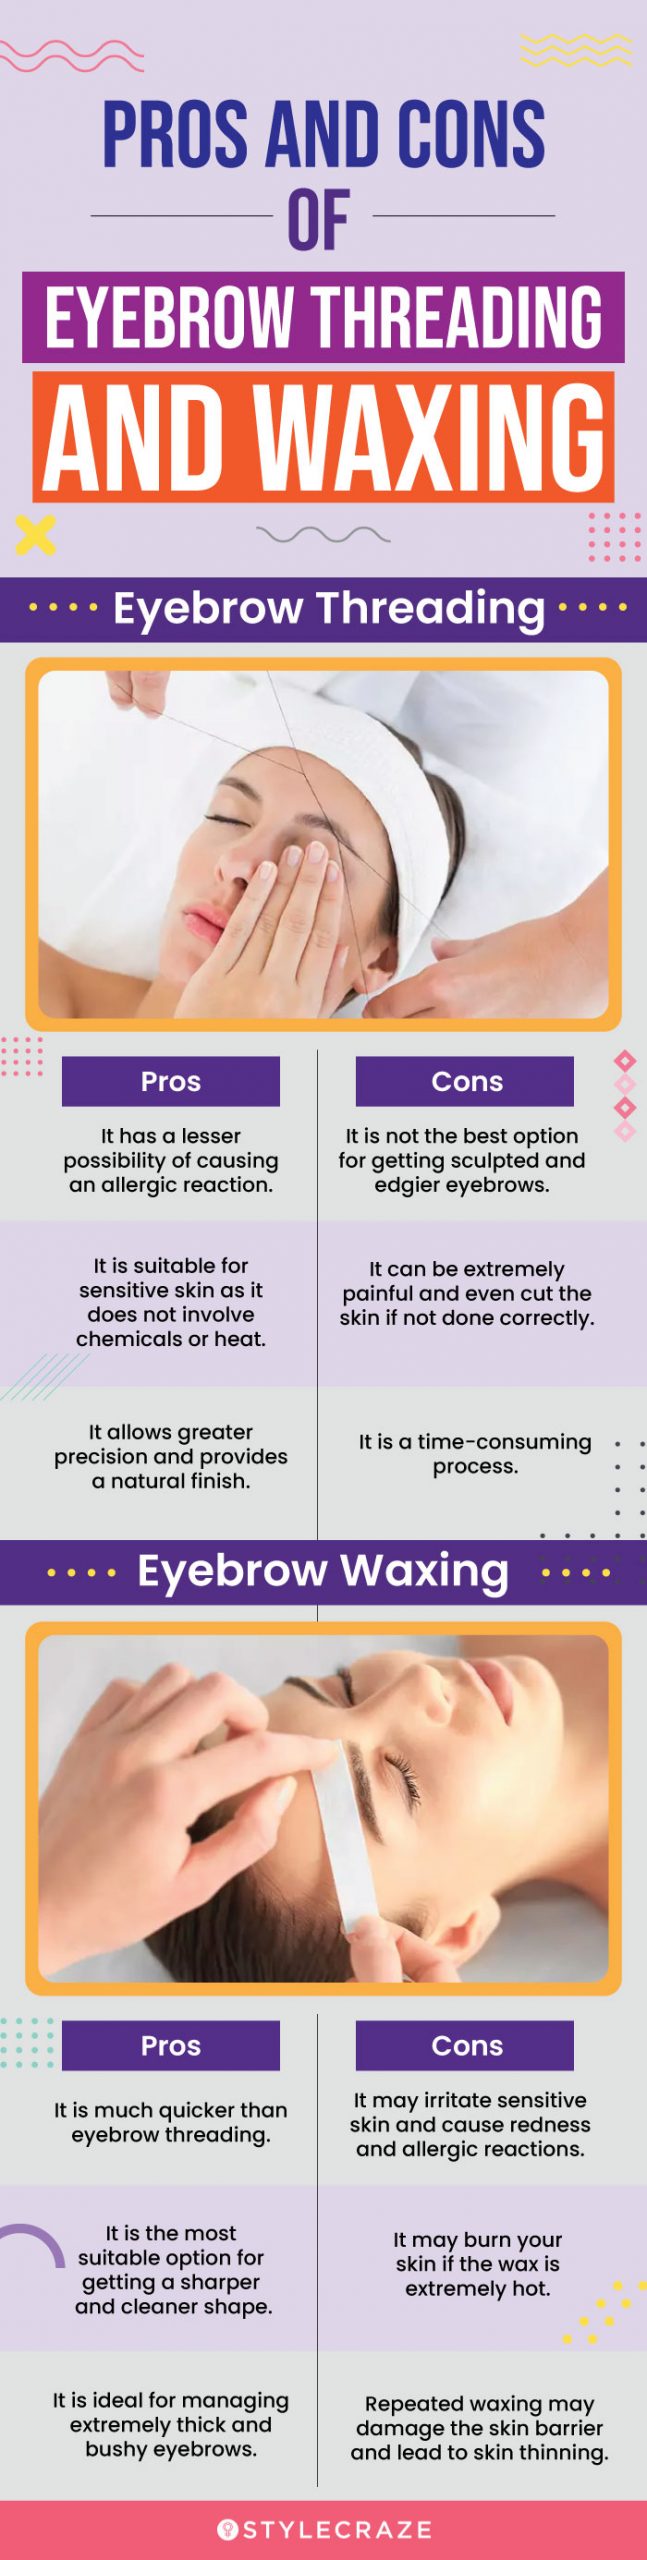 pros and cons of eyebrow threading and waxing(infographic)